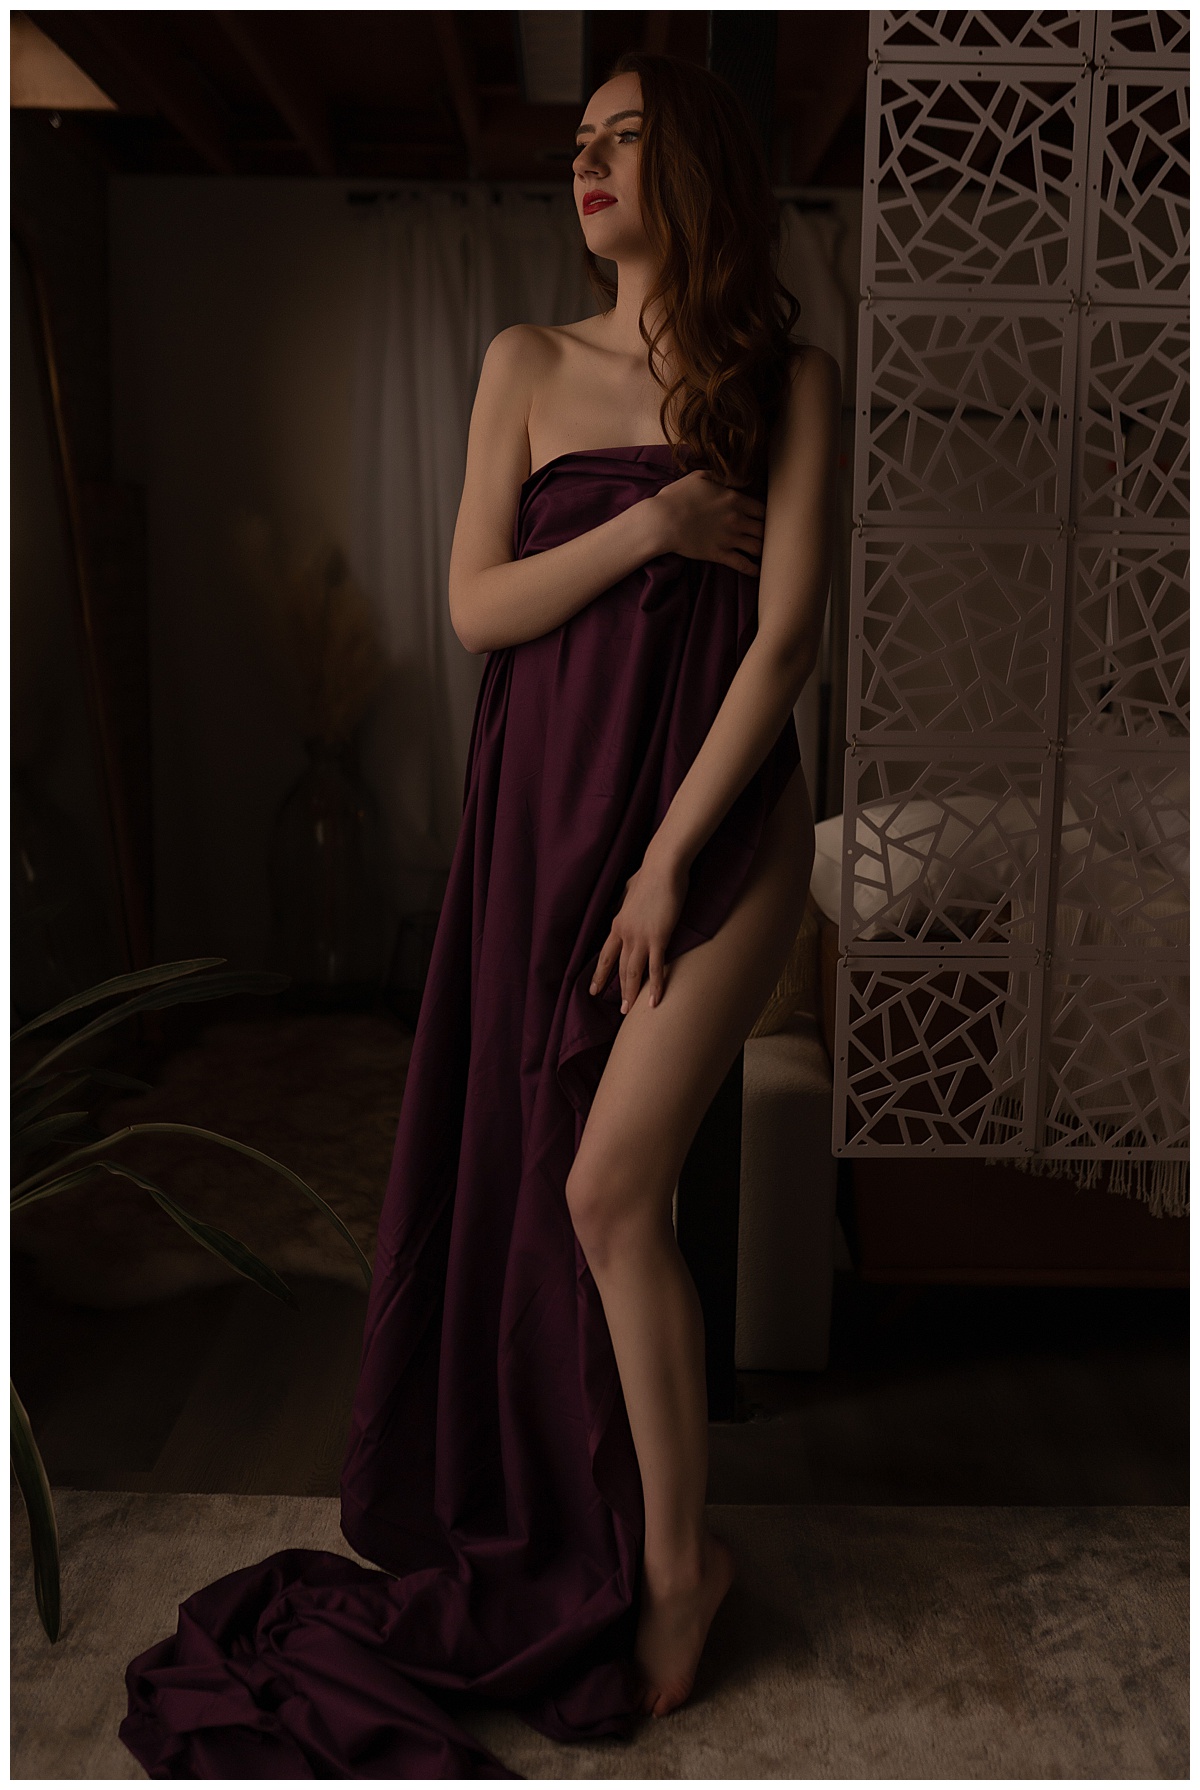 Adult covers body with maroon sheet for Emma Christine Photography